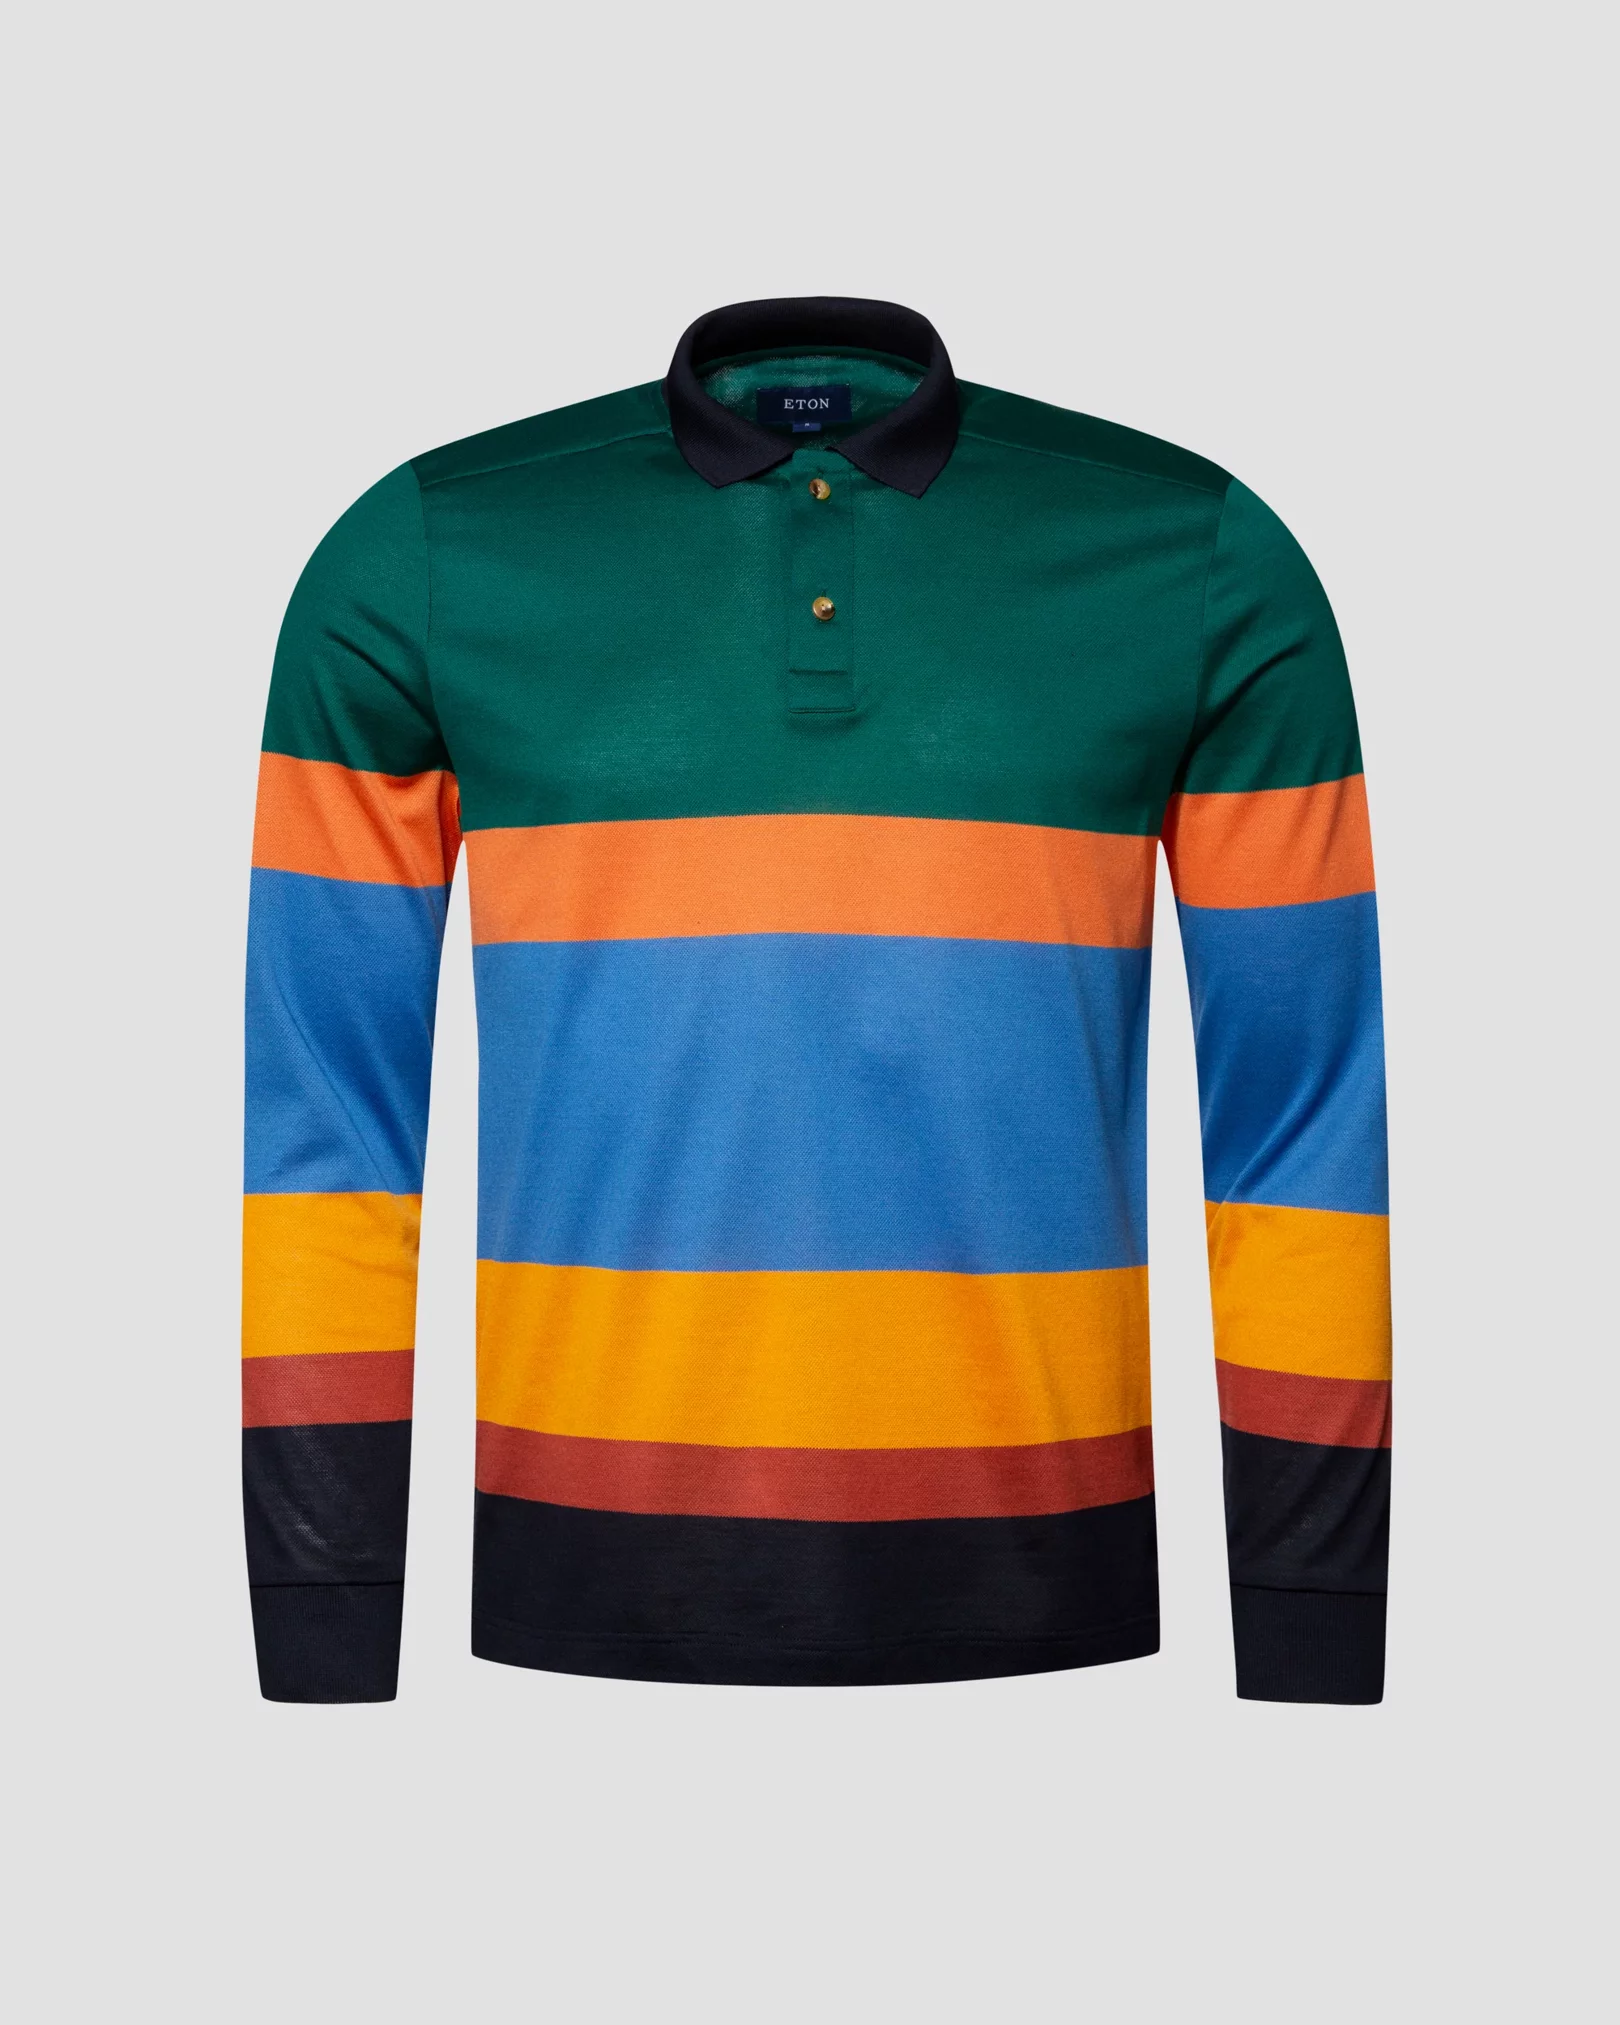 Eton - mid green knit pique knitted jersey